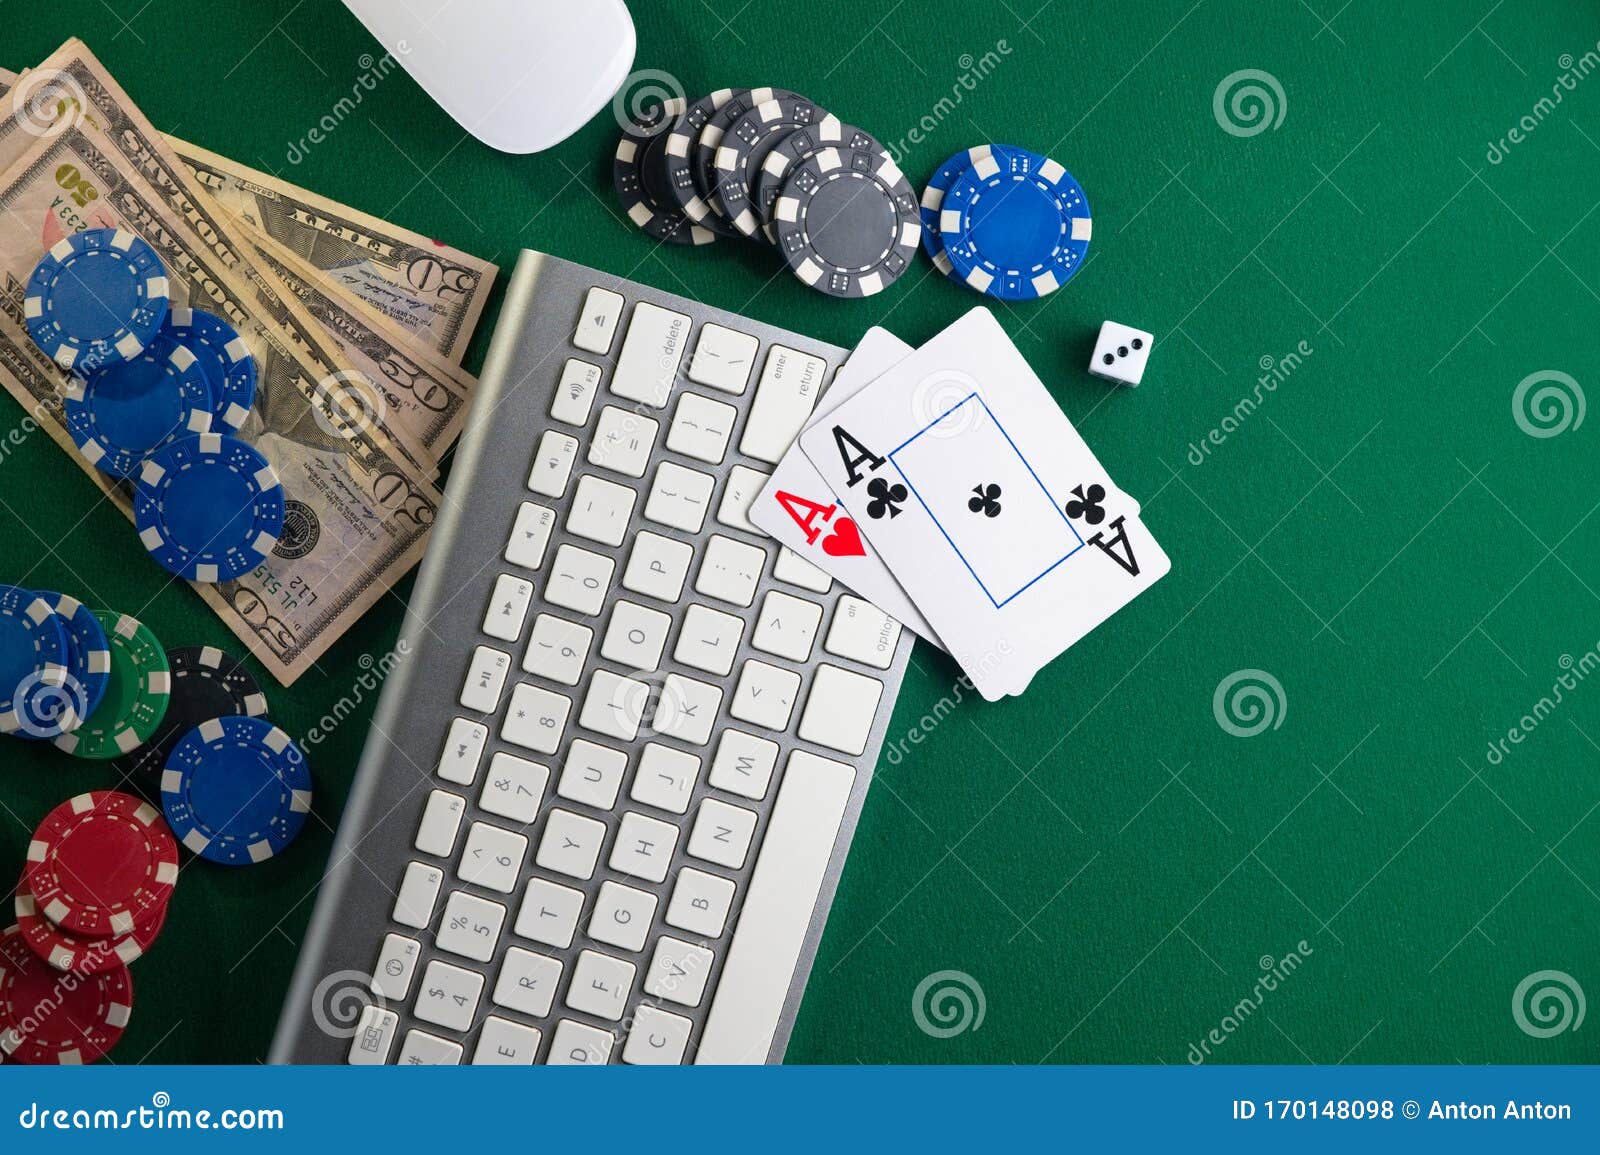 10 Reasons Why Having An Excellent roulette online Is Not Enough